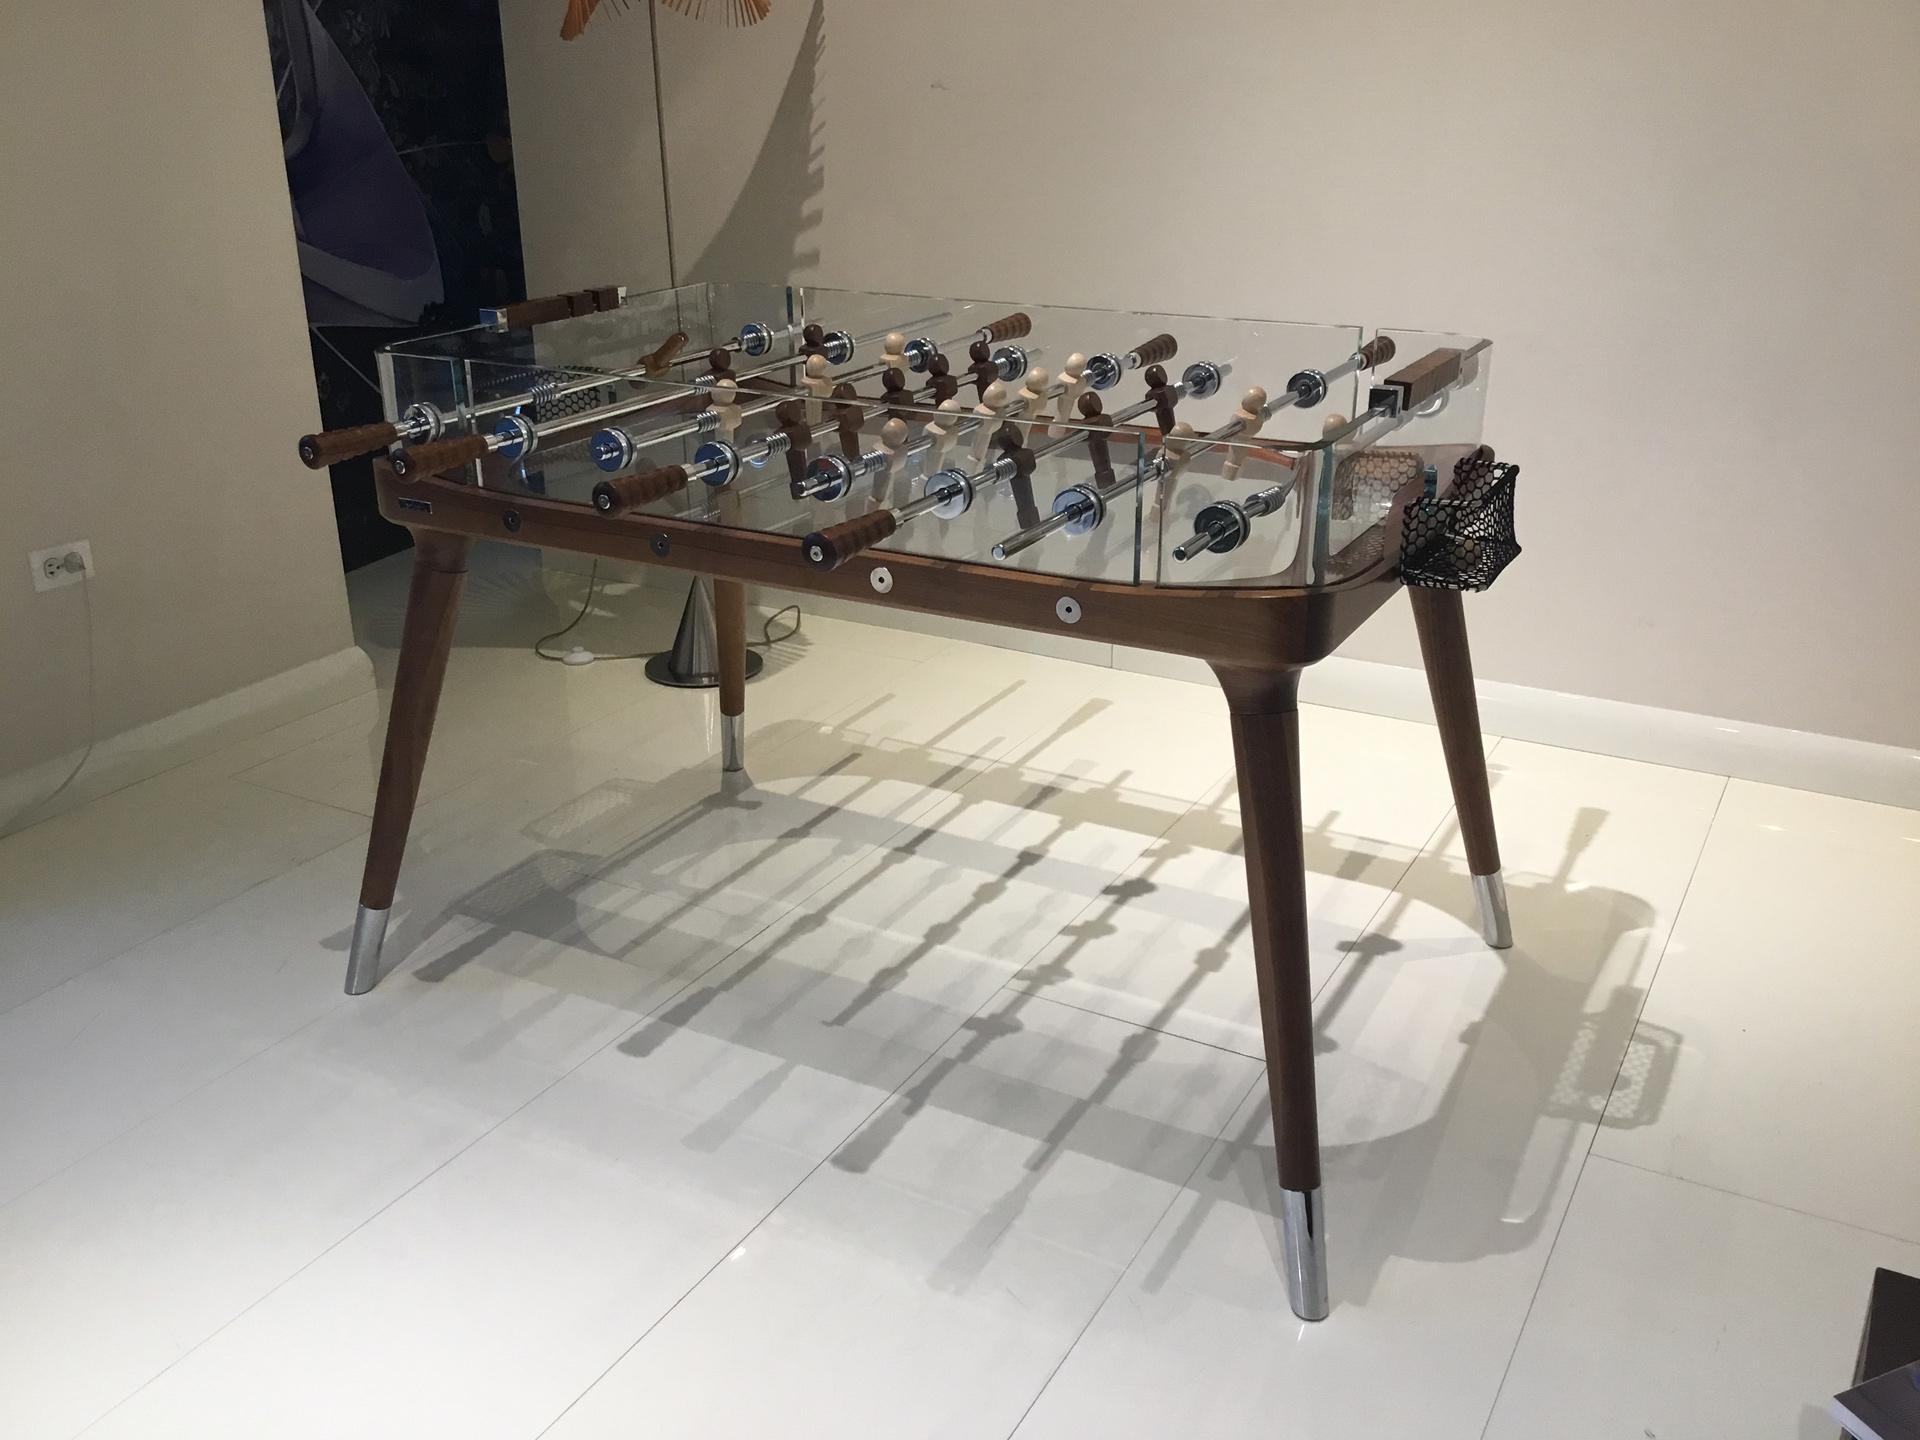 A surprisingly chic spin on the timeless game of foosball.

The attractively slender yet incredibly sturdy Canaletto wood legs and structure evoke the world of sailing while the luxurious, transparent crystal playing field redefines contemporary